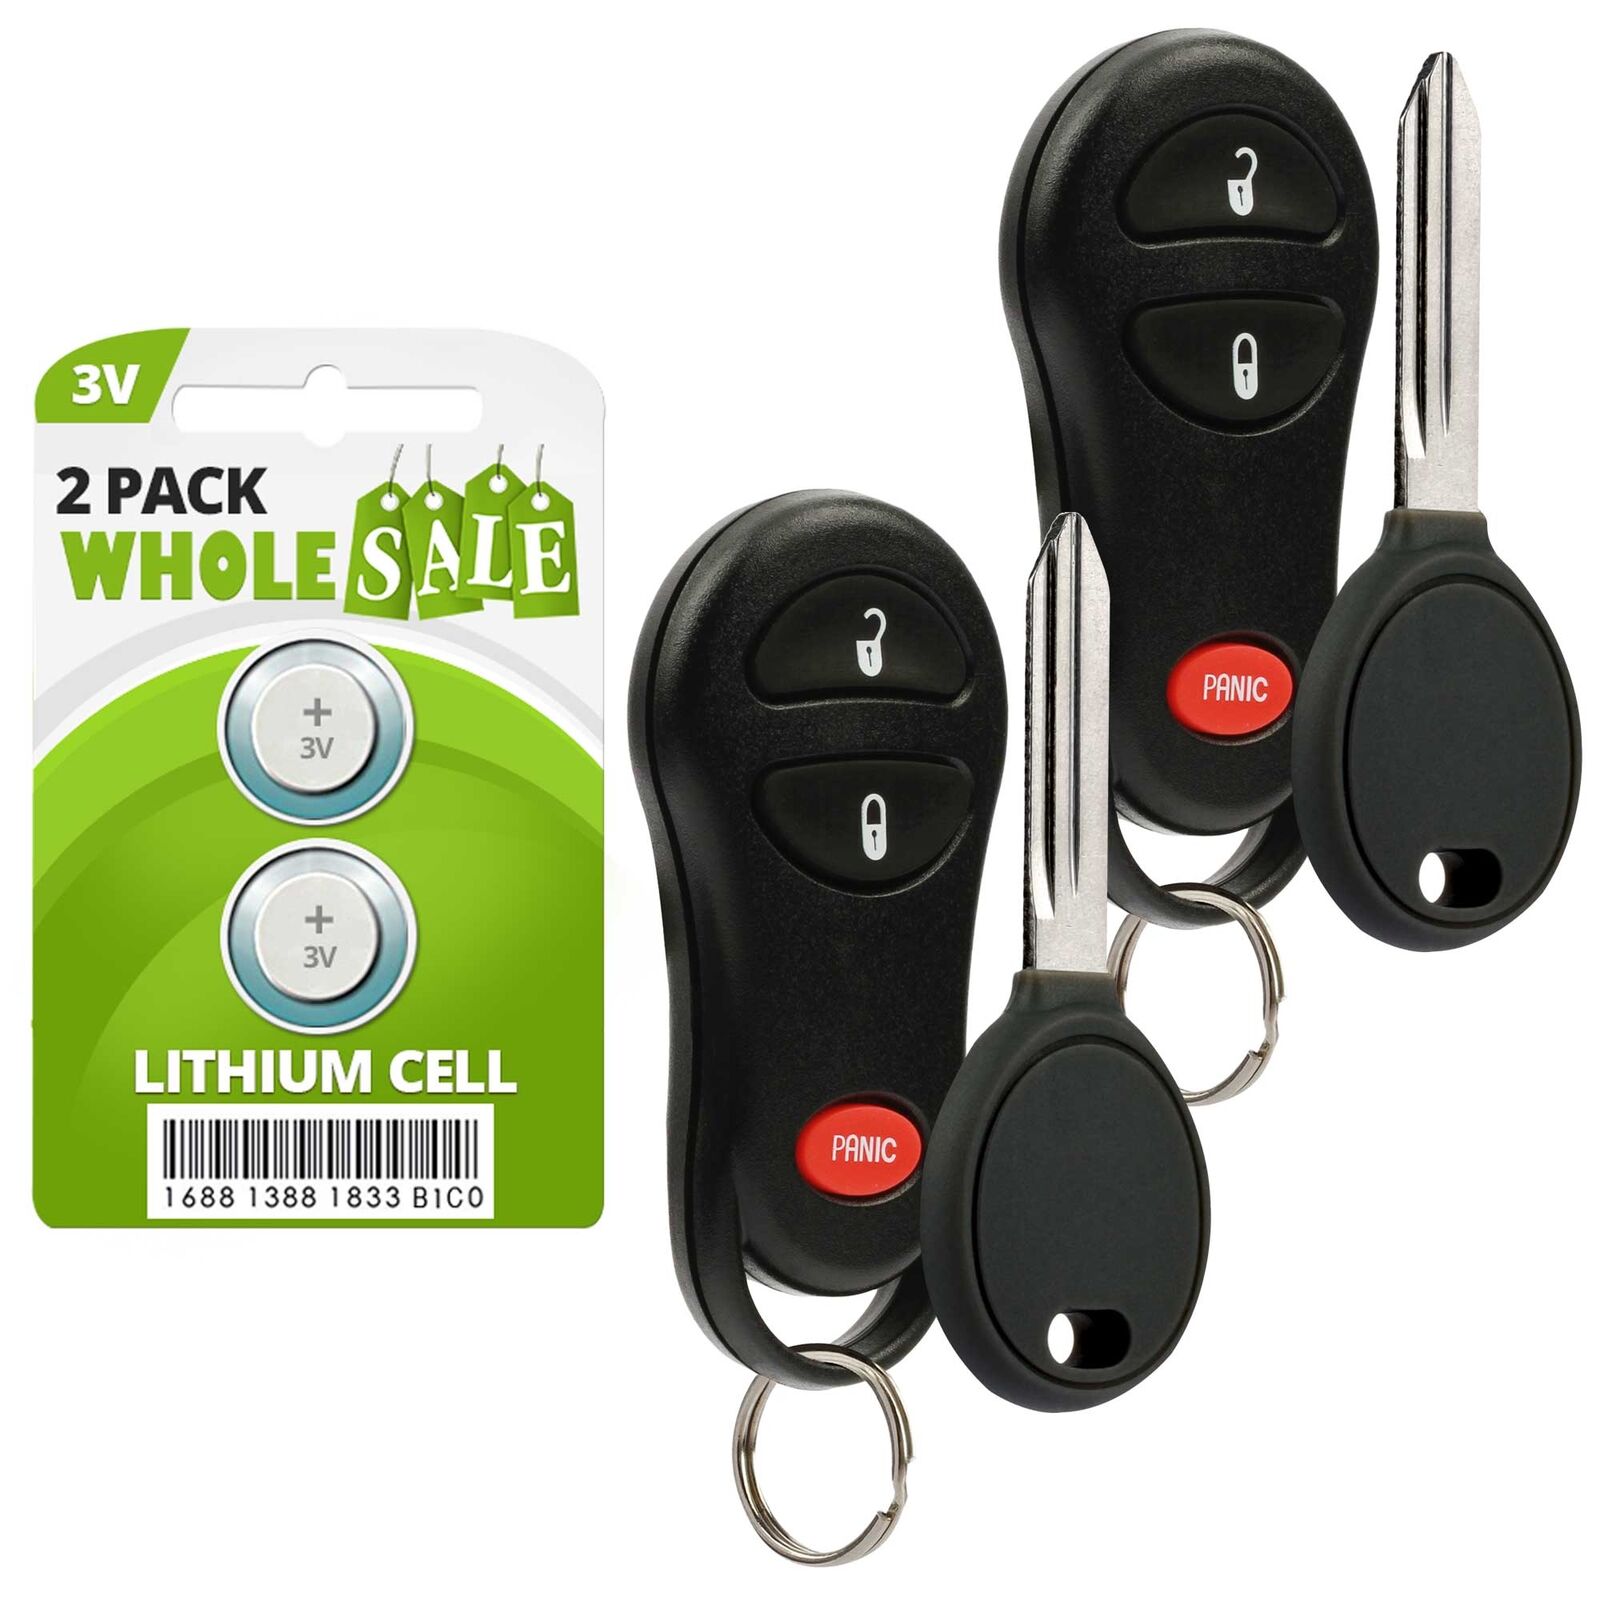 2 Replacement For 2002 2003 2004 2005 Dodge Ram 1500 2500 3500 4000 Key + Fob